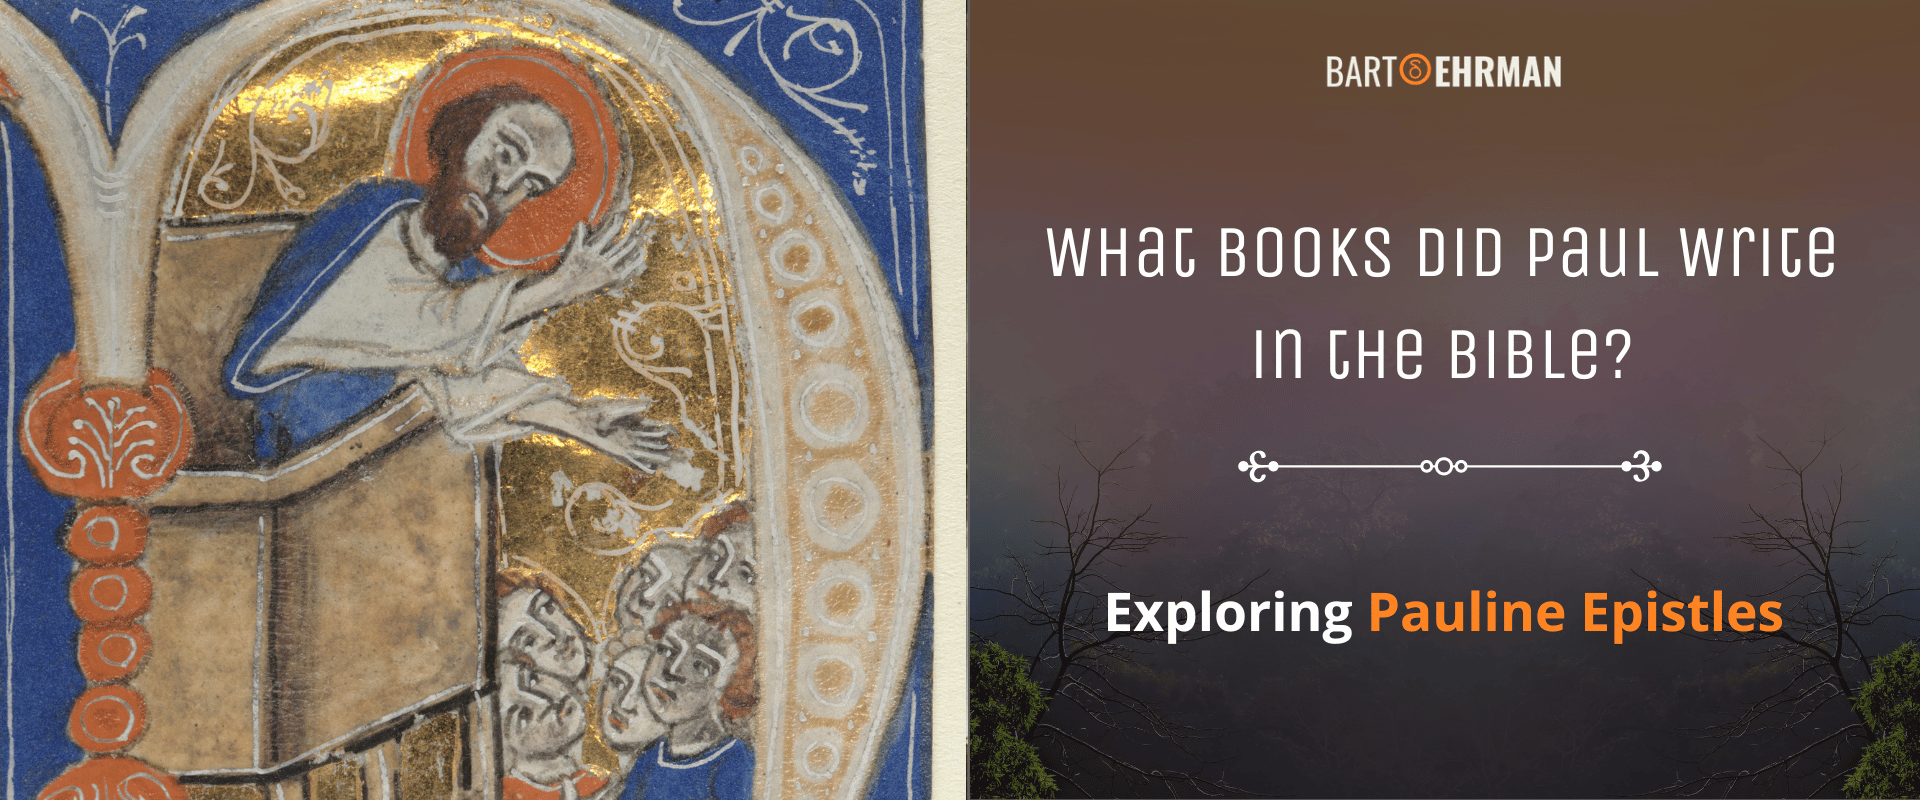 What Books Did Paul Write in the Bible- Exploring Pauline Epistles